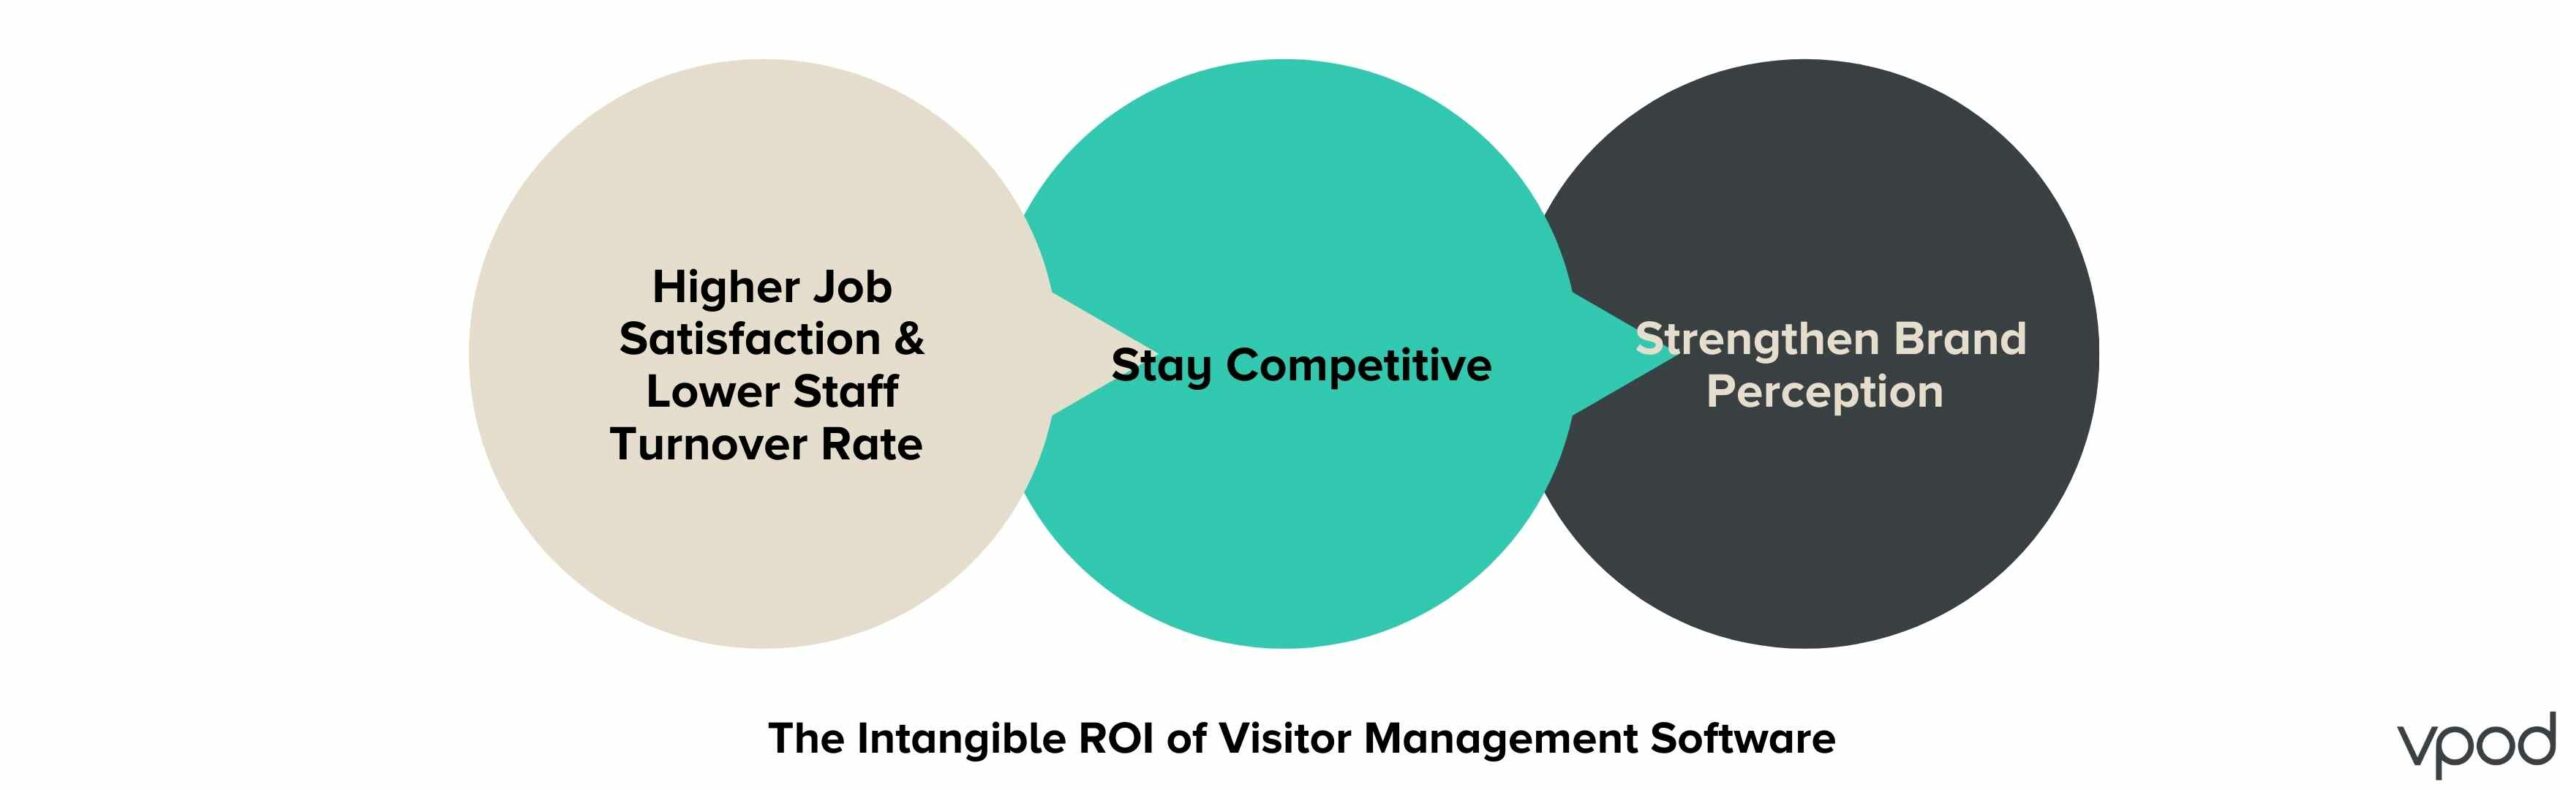 3-intangible-ROI-of-visitor-management-software